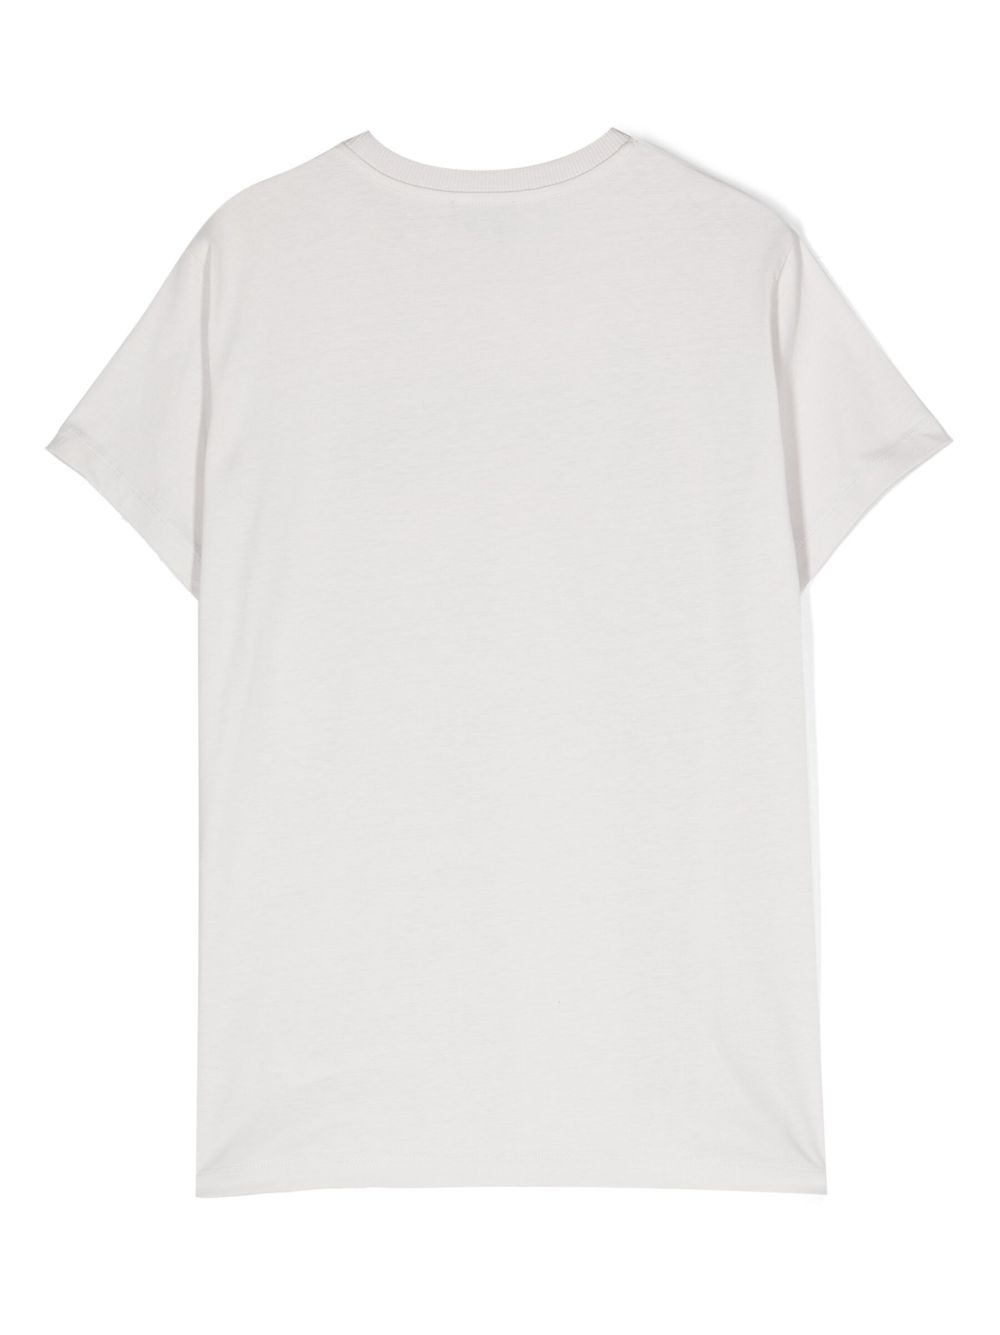 Gray t-shirt for boys with logo